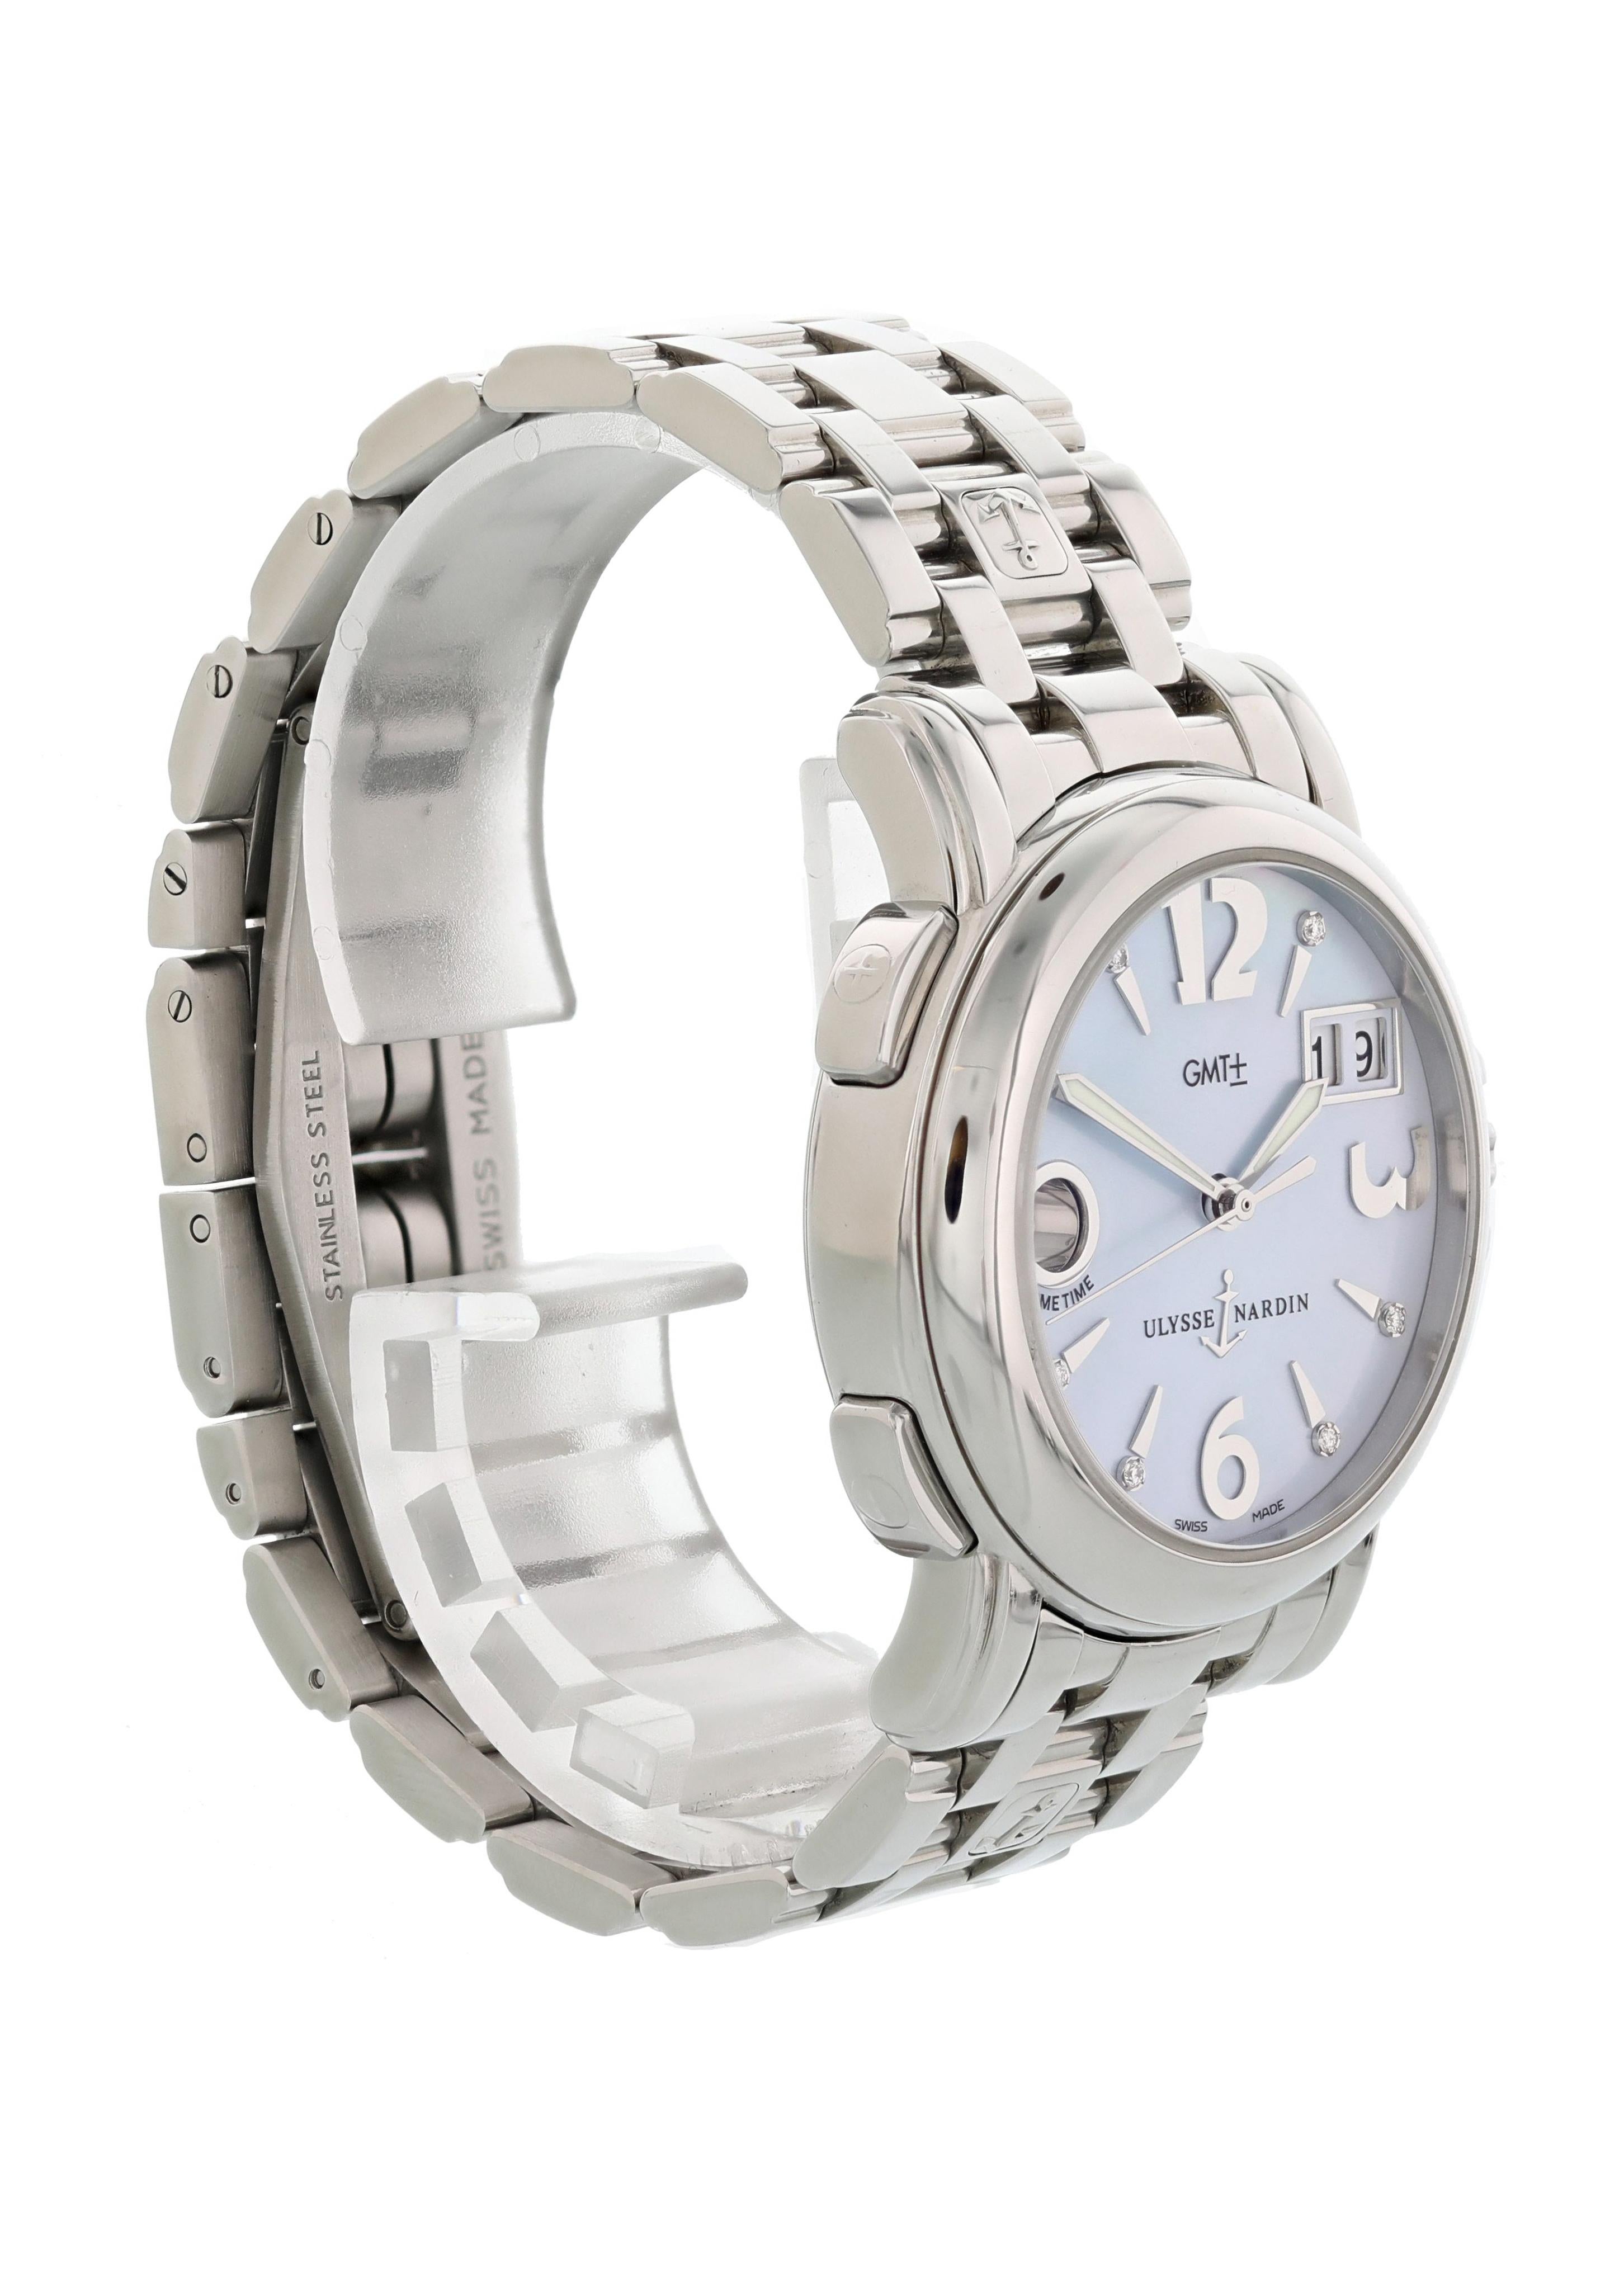 Ulysse Nardin Big Date GMT 223-22 Mother of Pearl Ladies Watch In Excellent Condition For Sale In New York, NY